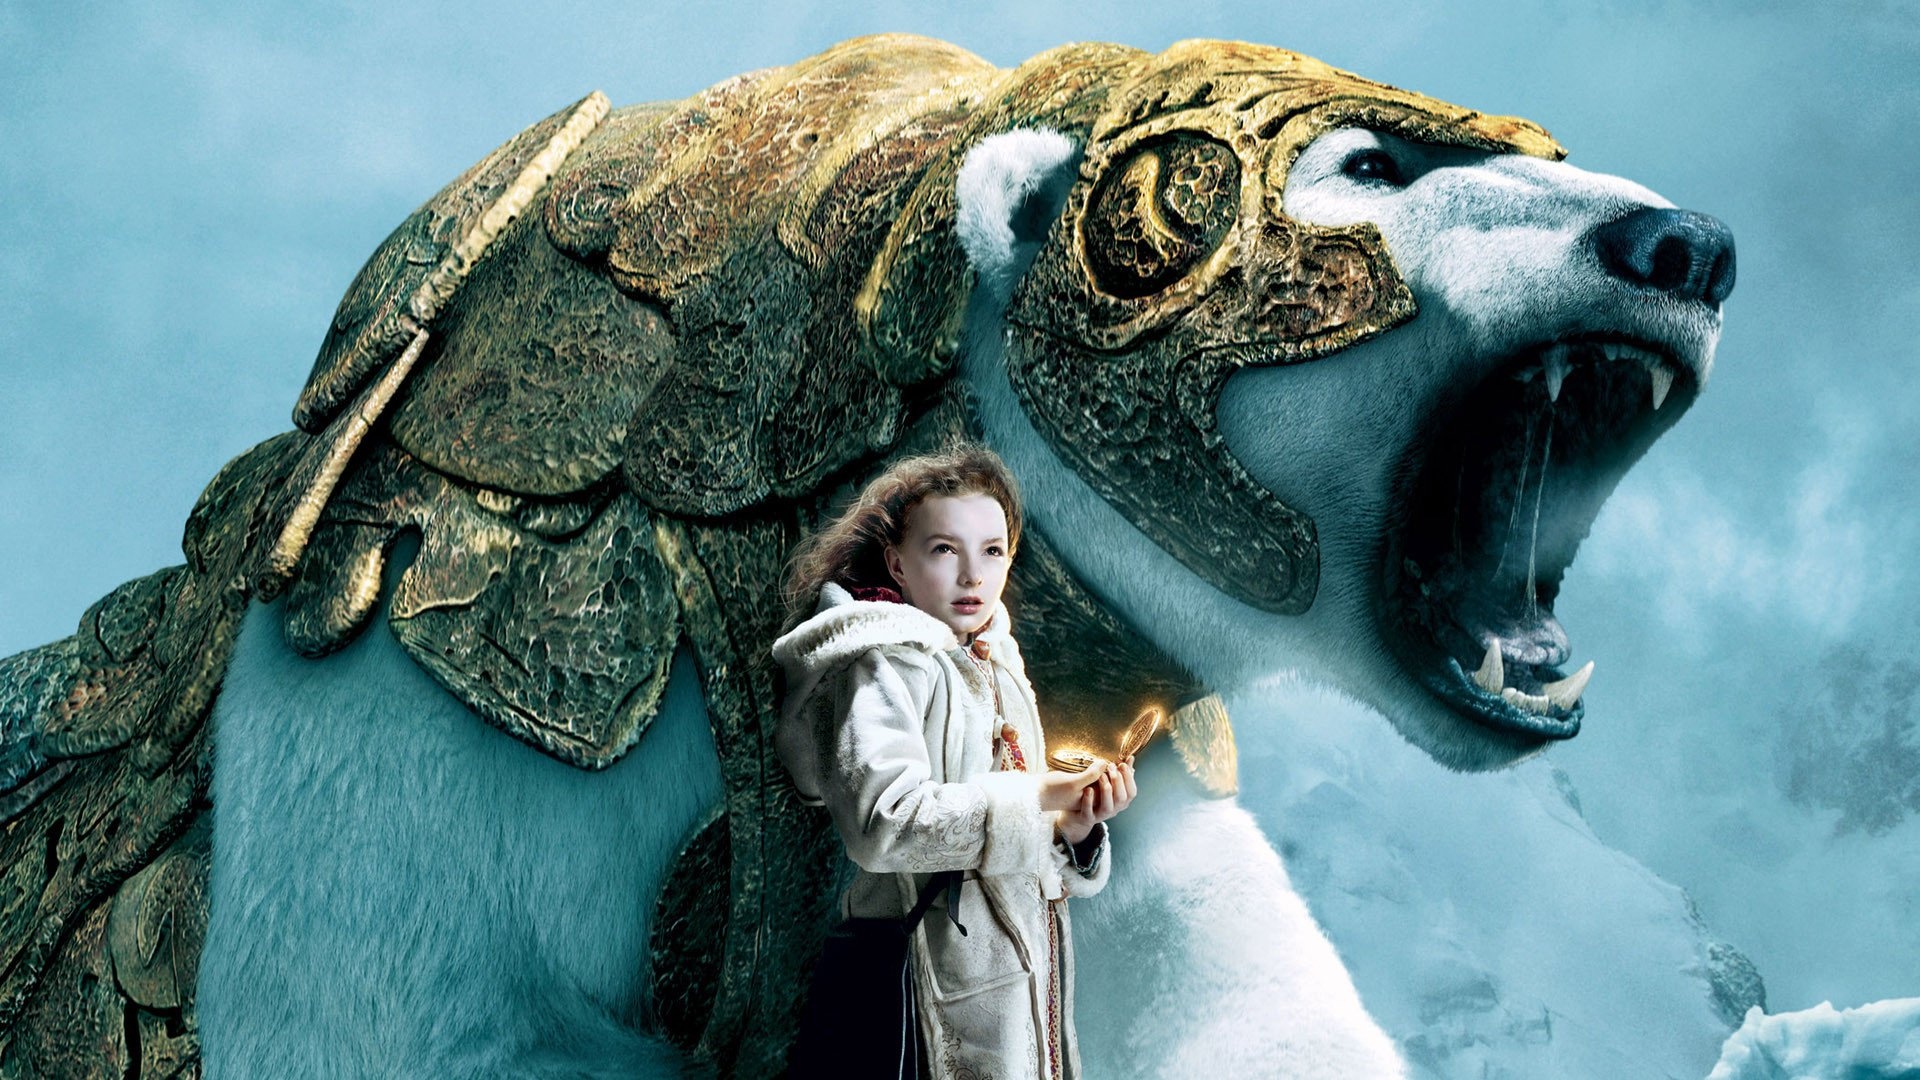 The Golden Compass, Soundtrack music, Complete song list, Tunefind, 1920x1080 Full HD Desktop